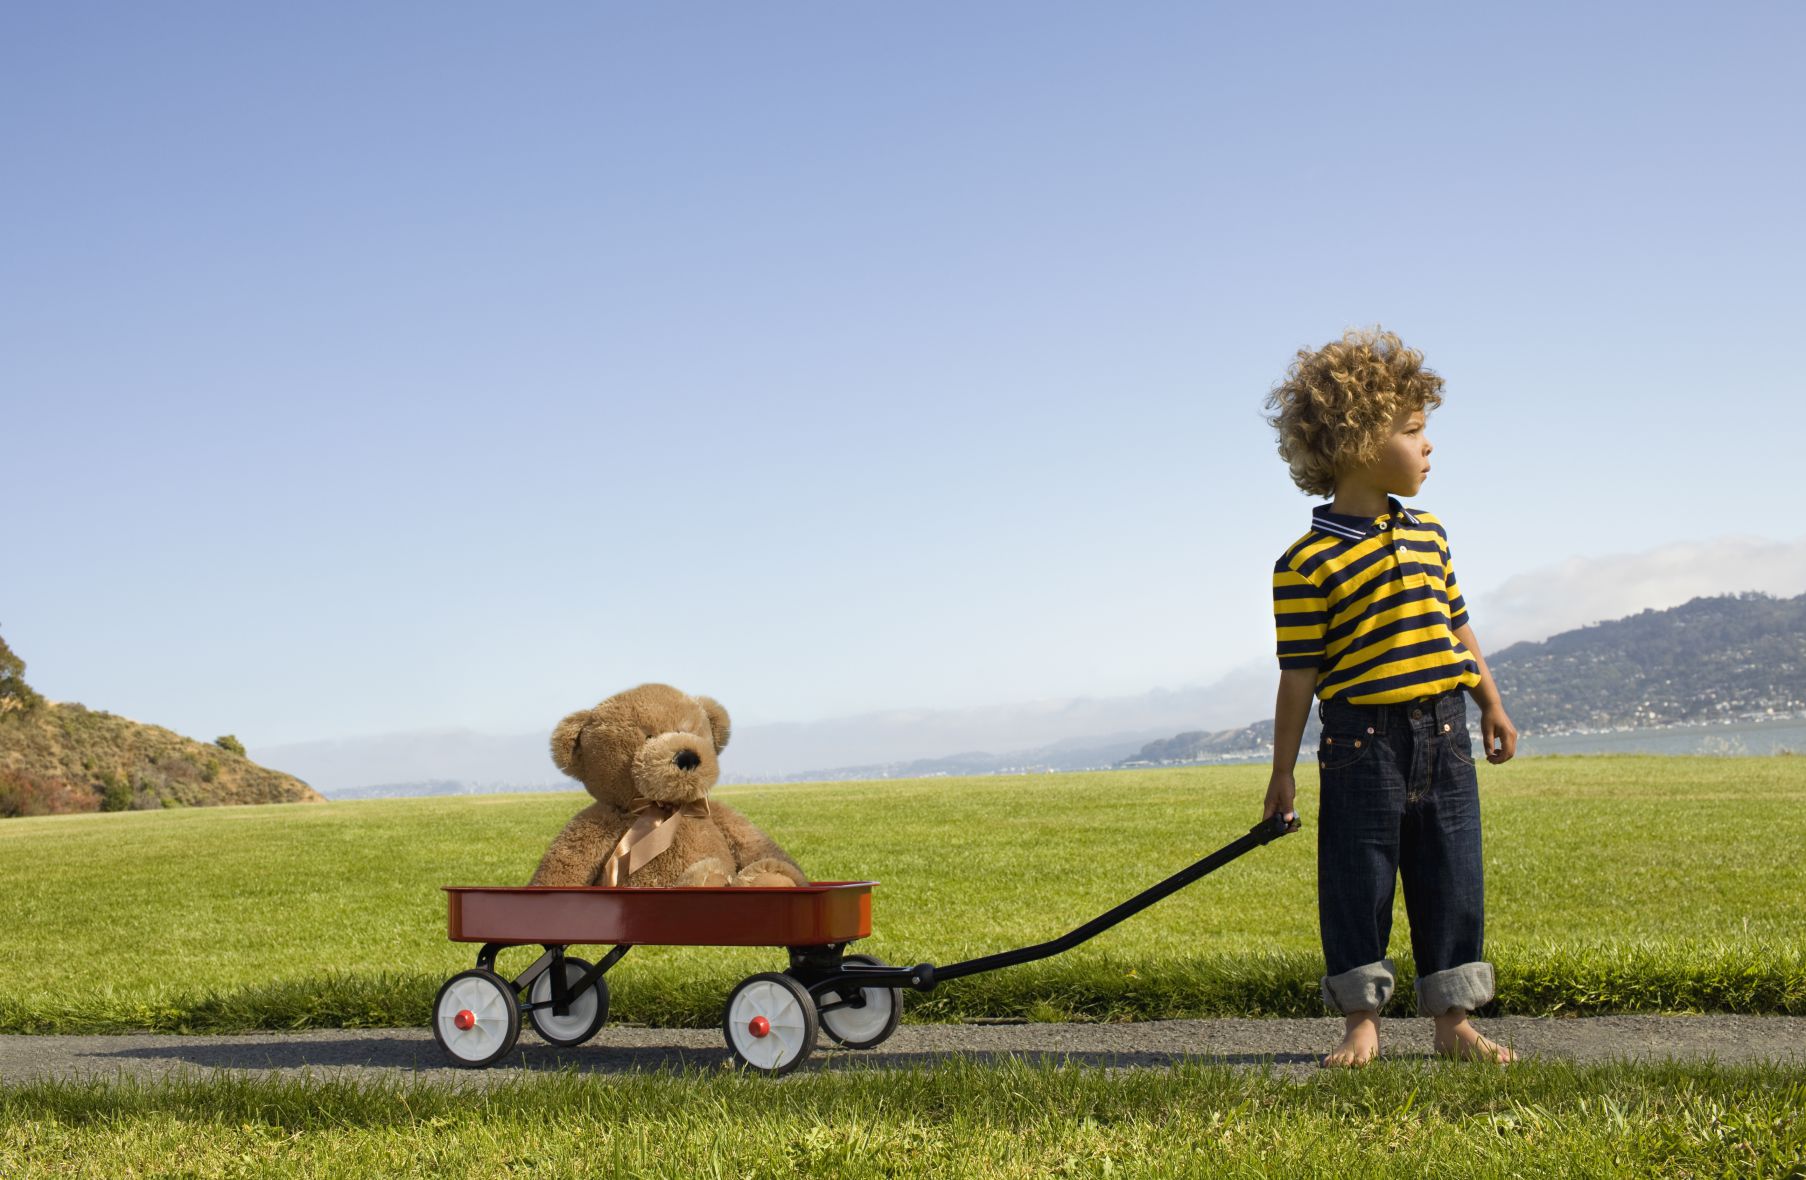 A child pulls a teddy bear in a red wagon. Behind them is a patch of grass and a body of water.